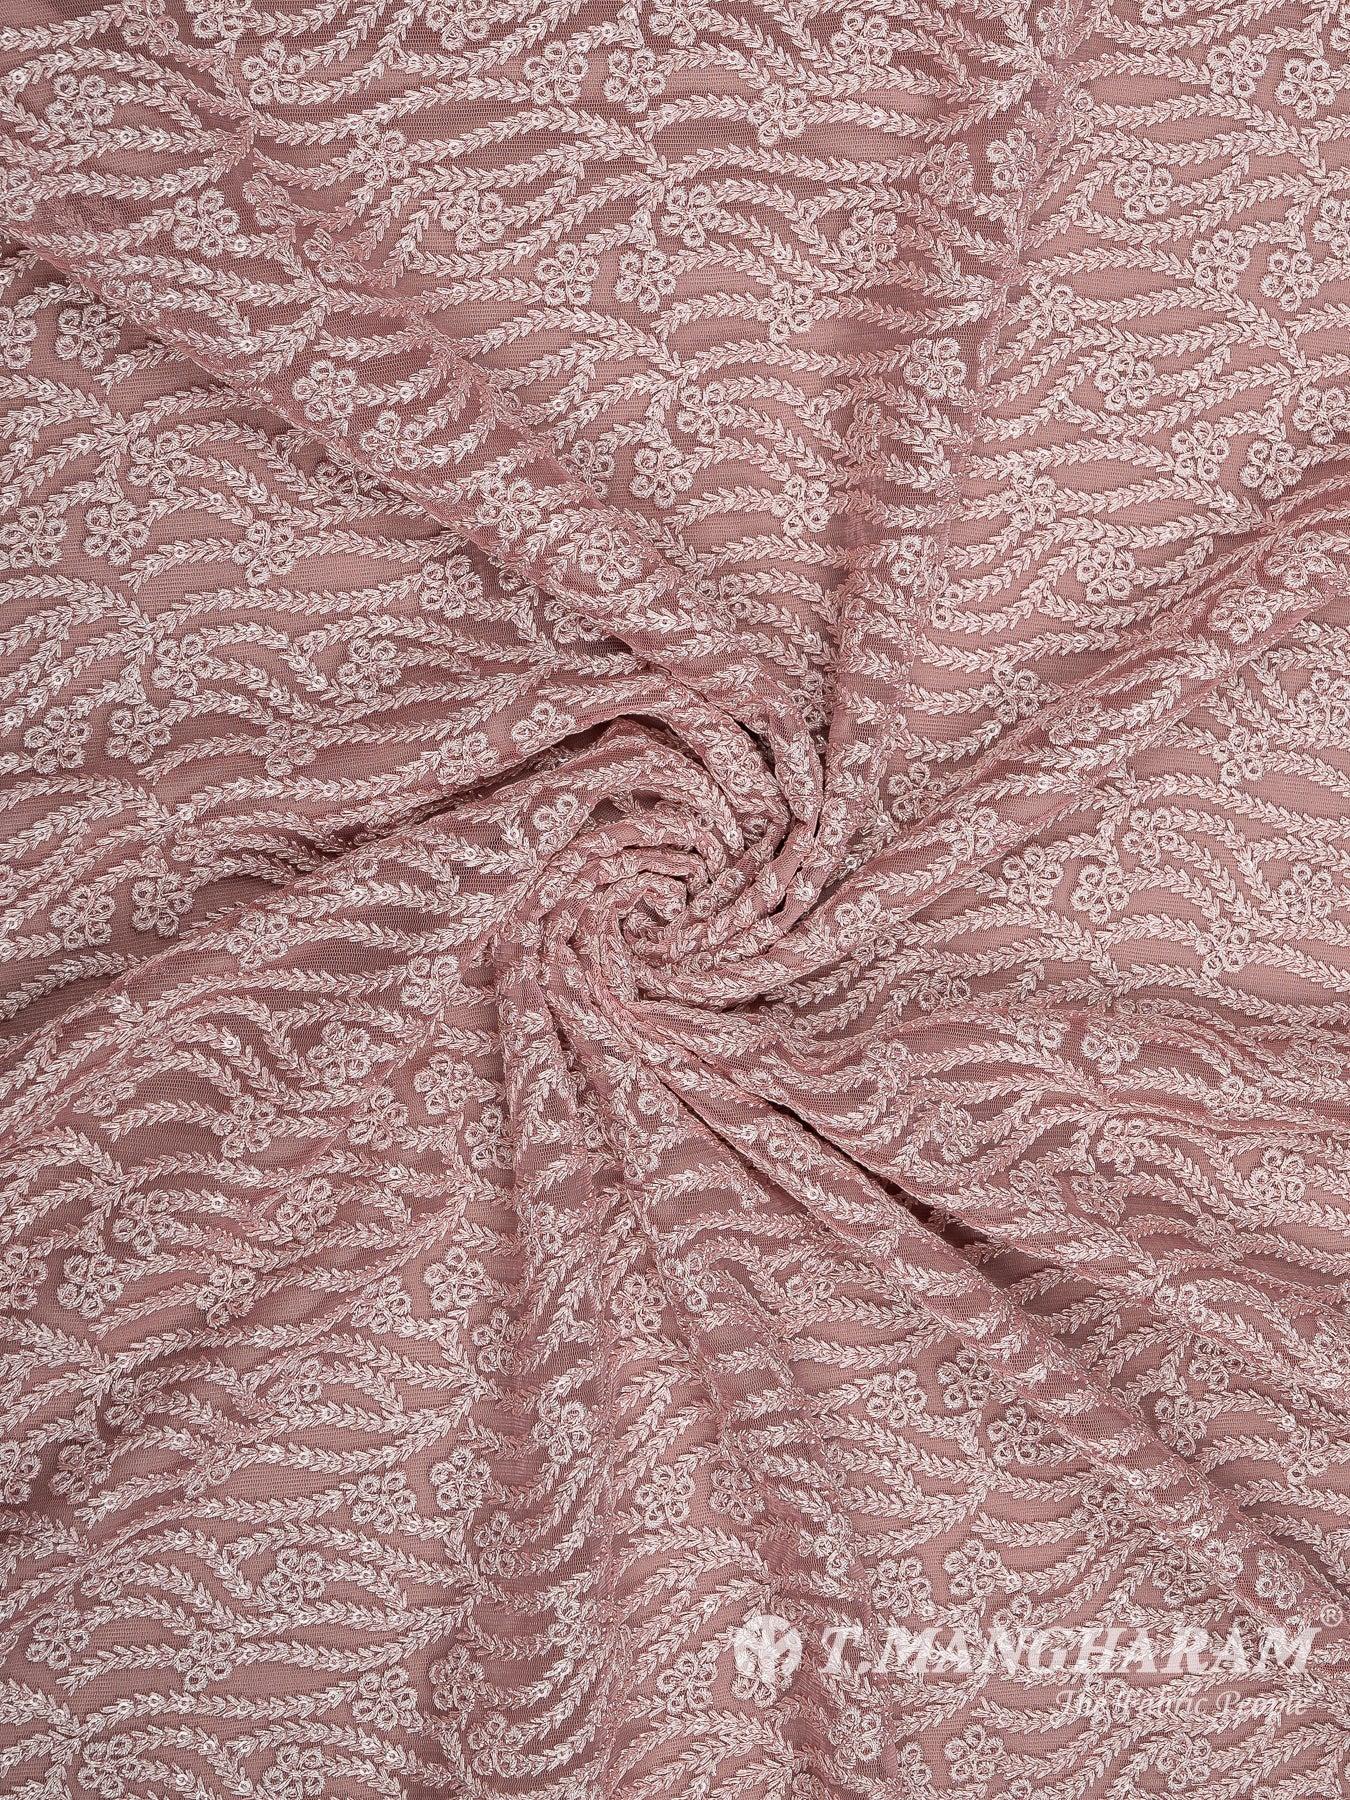 Peach Net Embroidery Fabric - EC8431 view-1